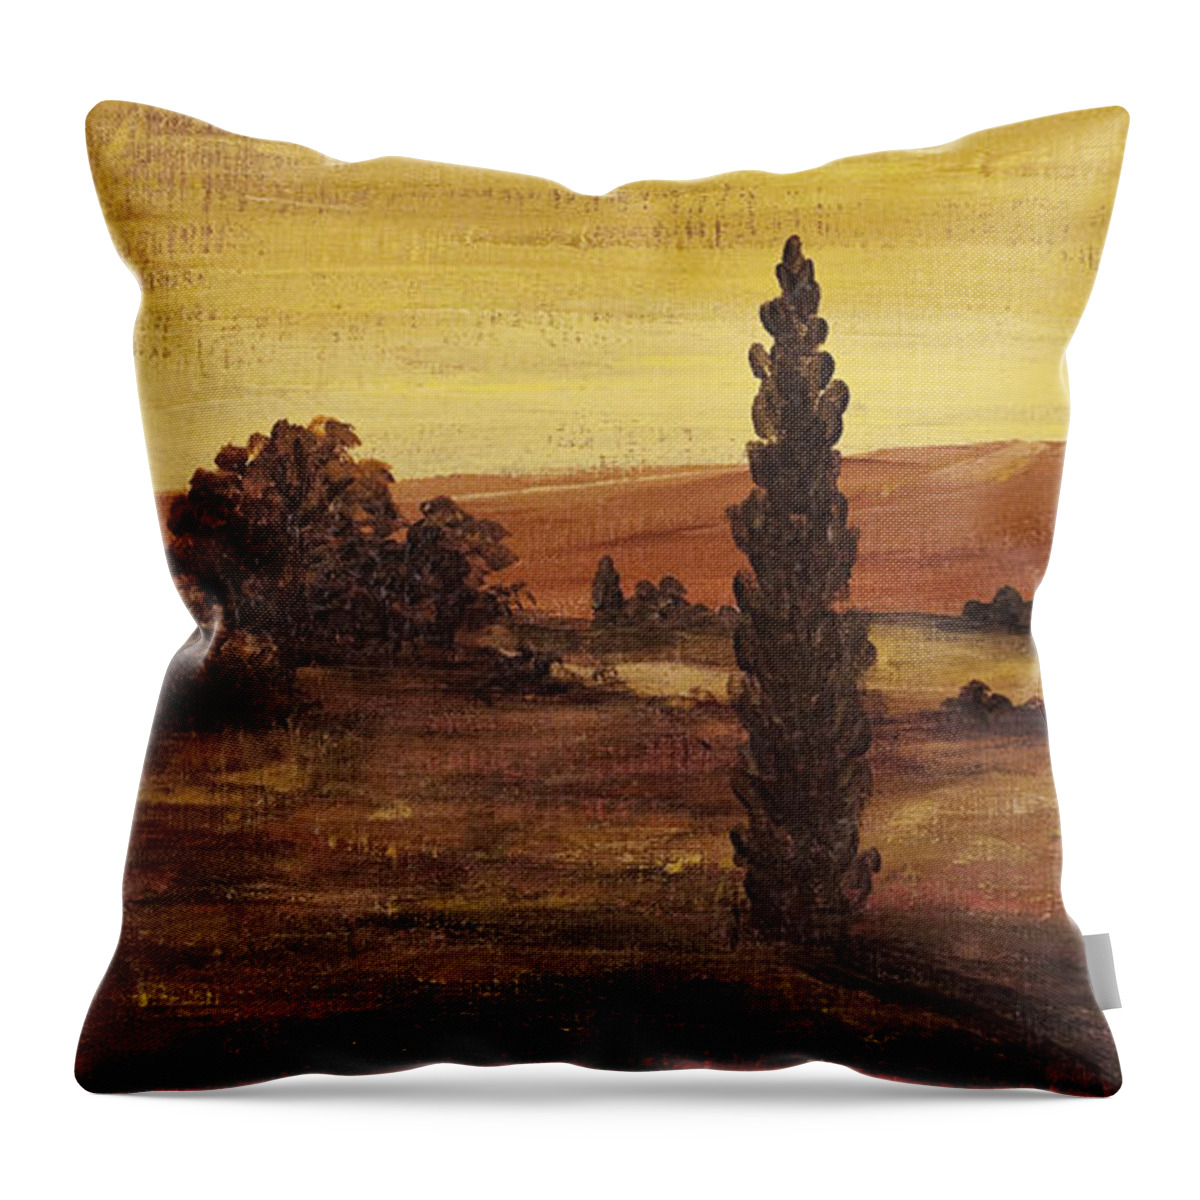 Landscape Throw Pillow featuring the painting Autumn Glow by Darice Machel McGuire